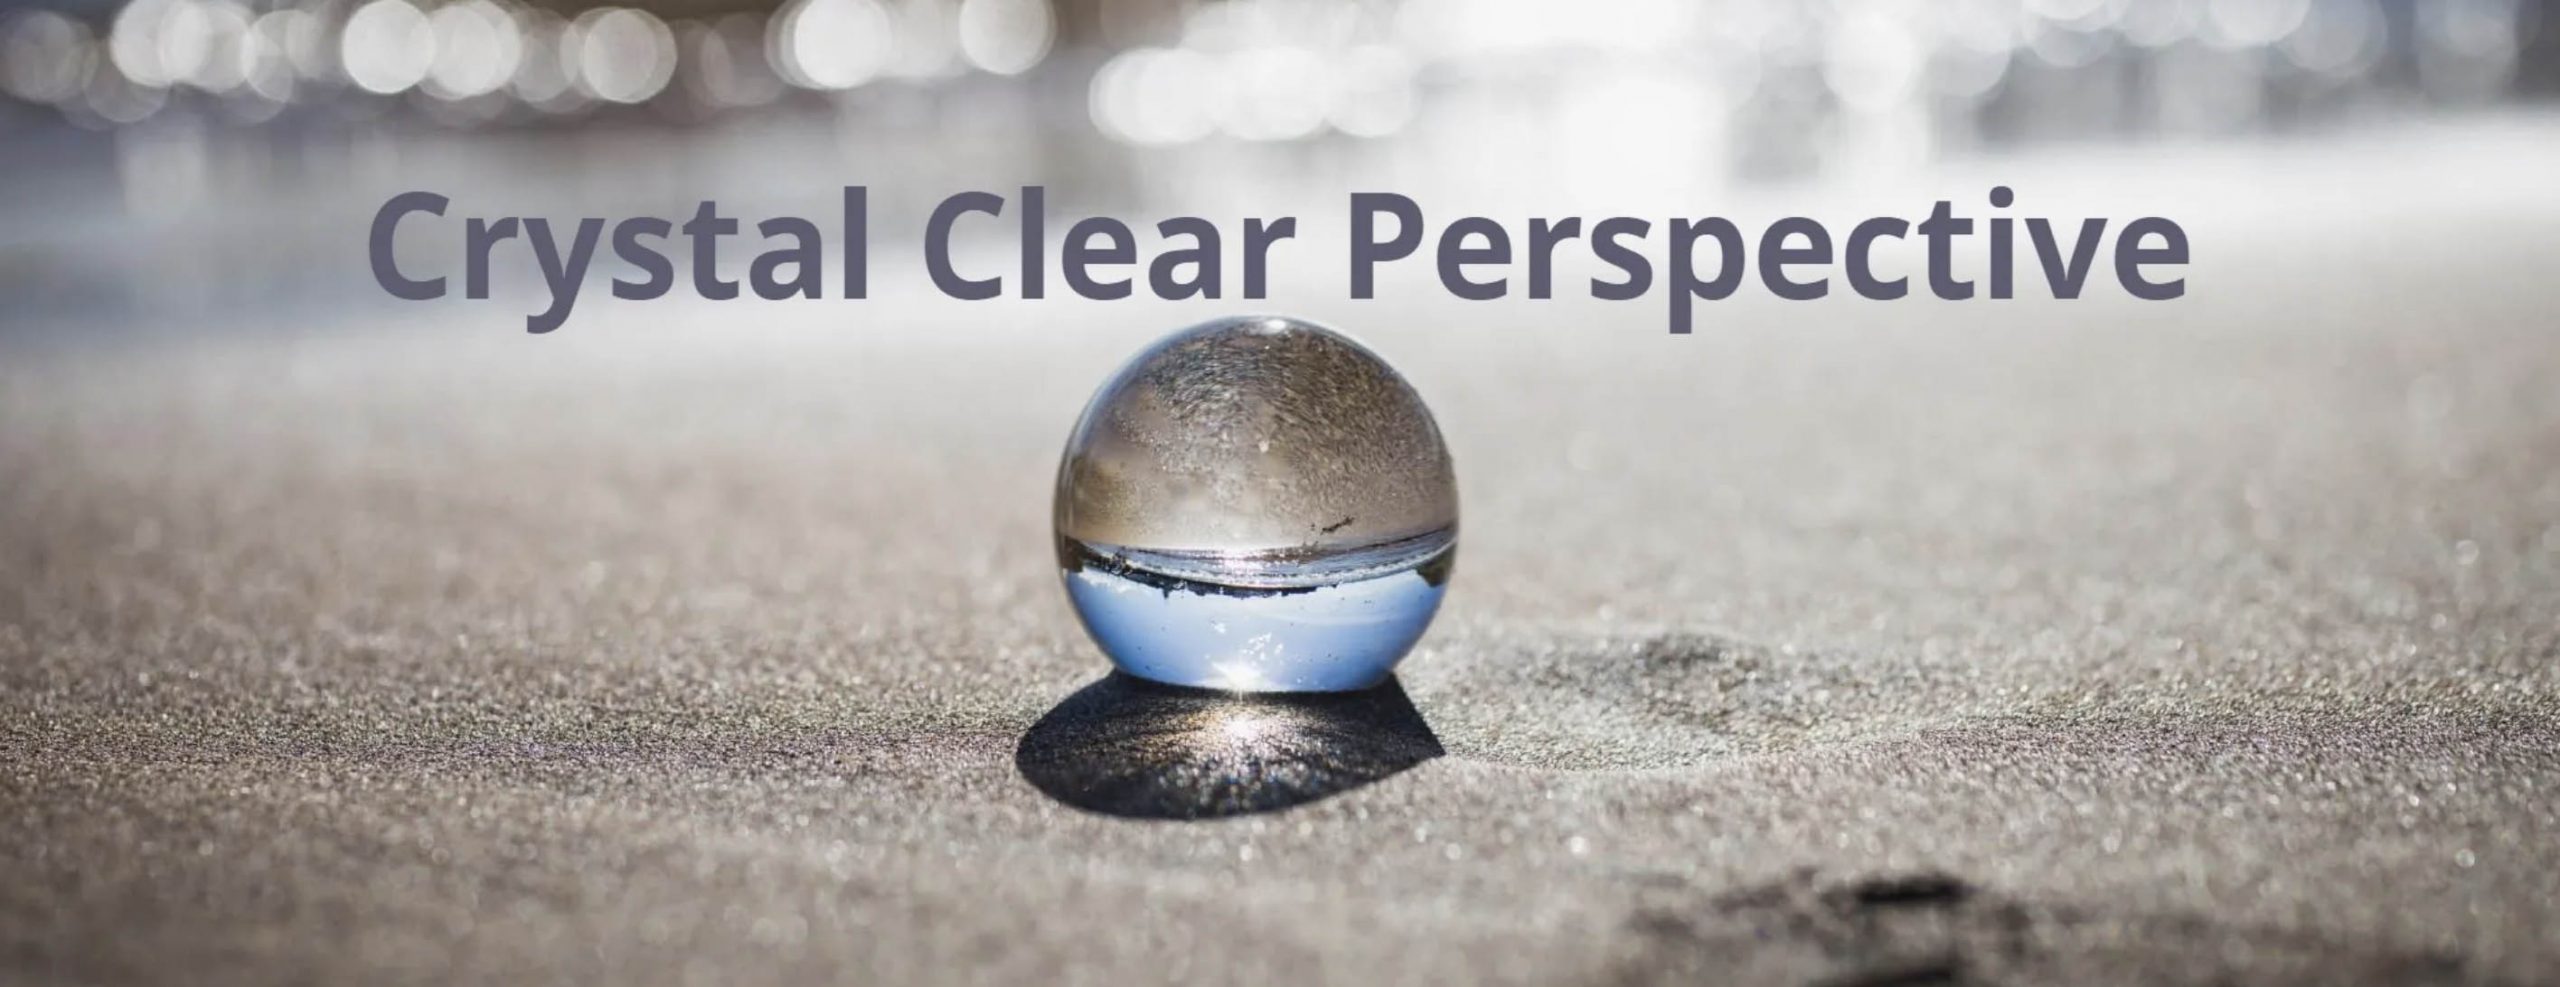 Crystal Clear Perspective Logo